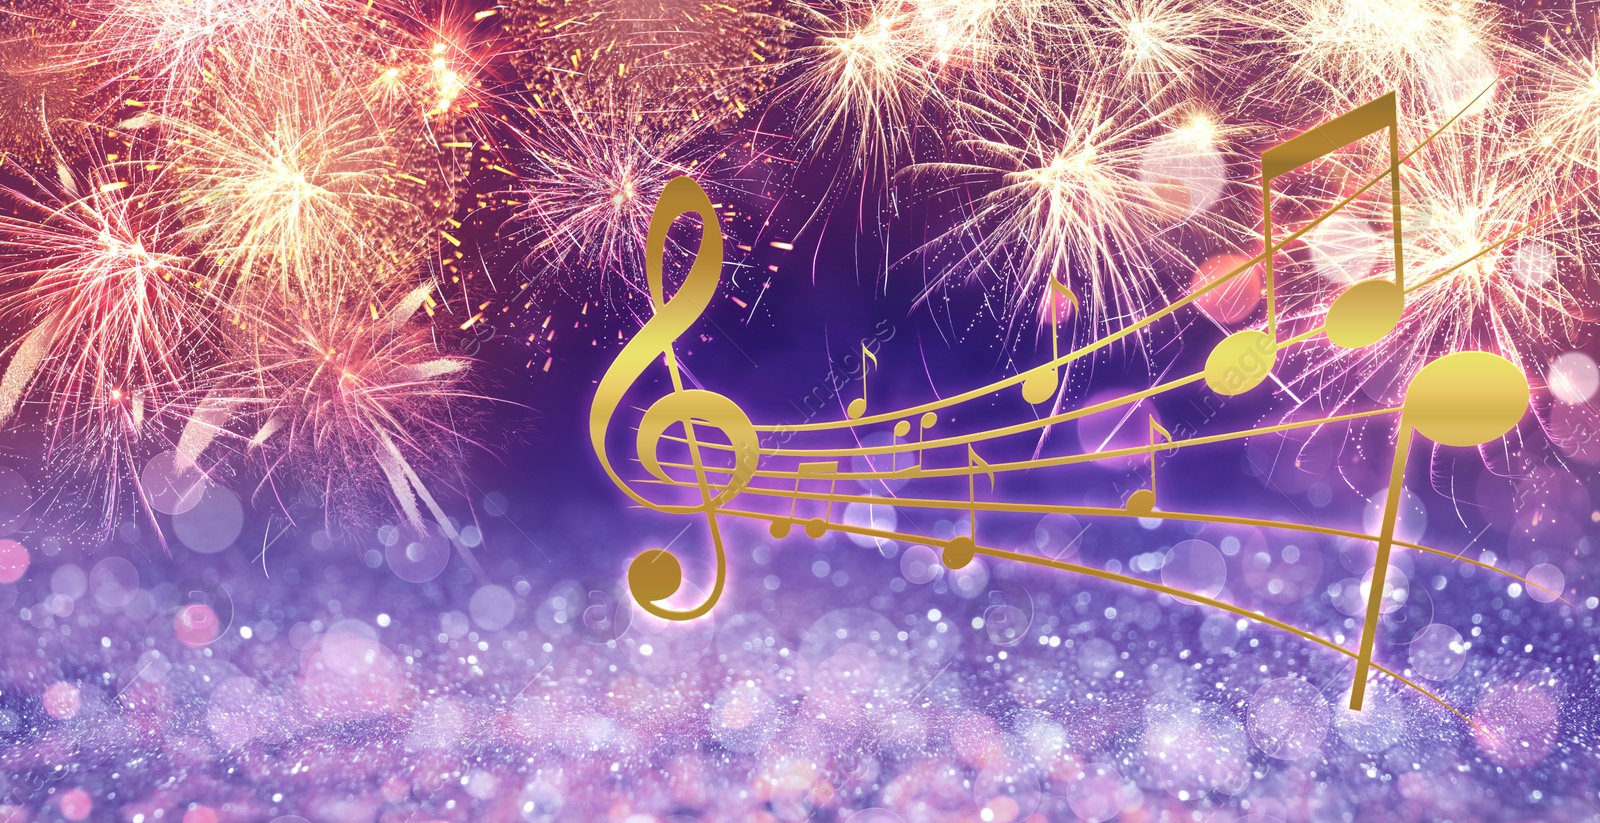 Image of Music notes and fireworks on blurred background, bokeh effect. Banner design